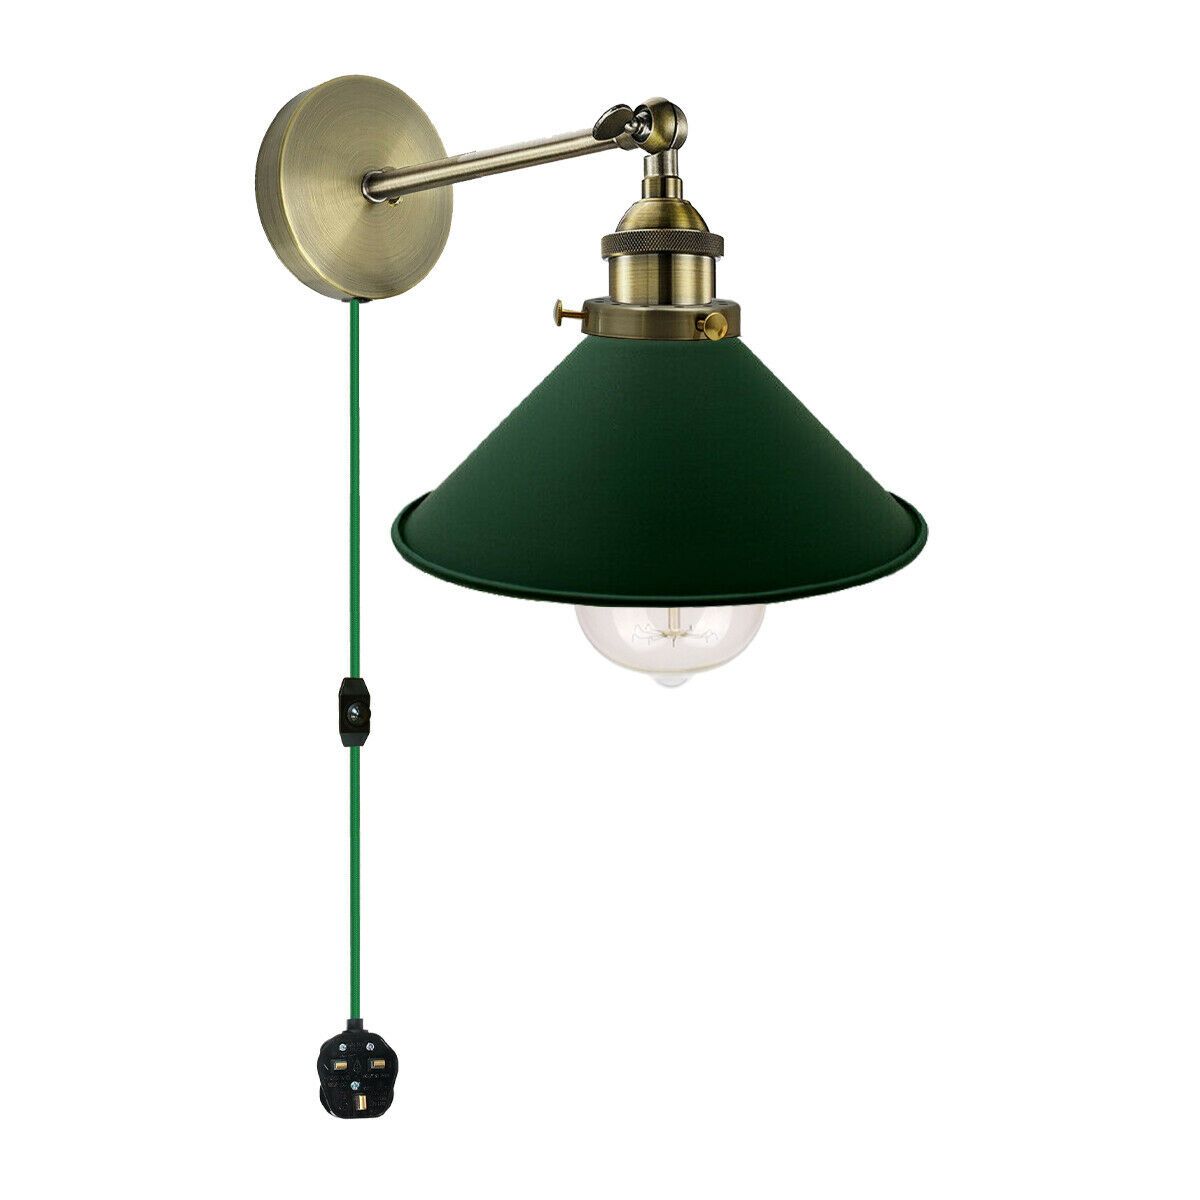 Vintage Green Cone Lamp Shade-E27 Holder & Plug-In Dimmer Switch